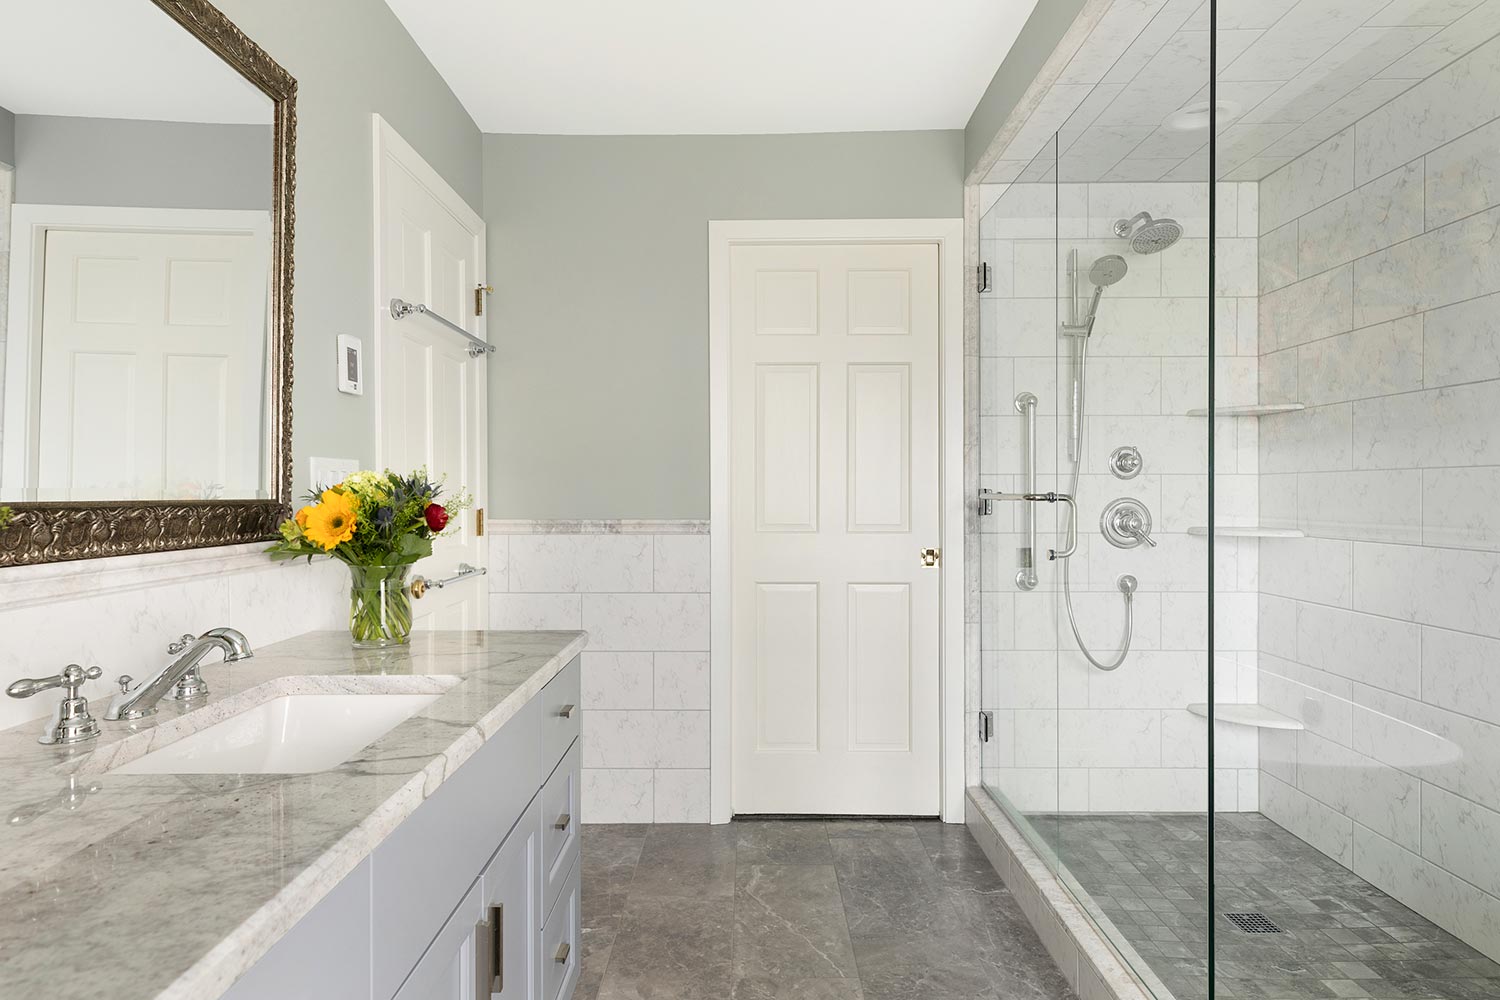 Gray and white tiled bathroom with granite counter